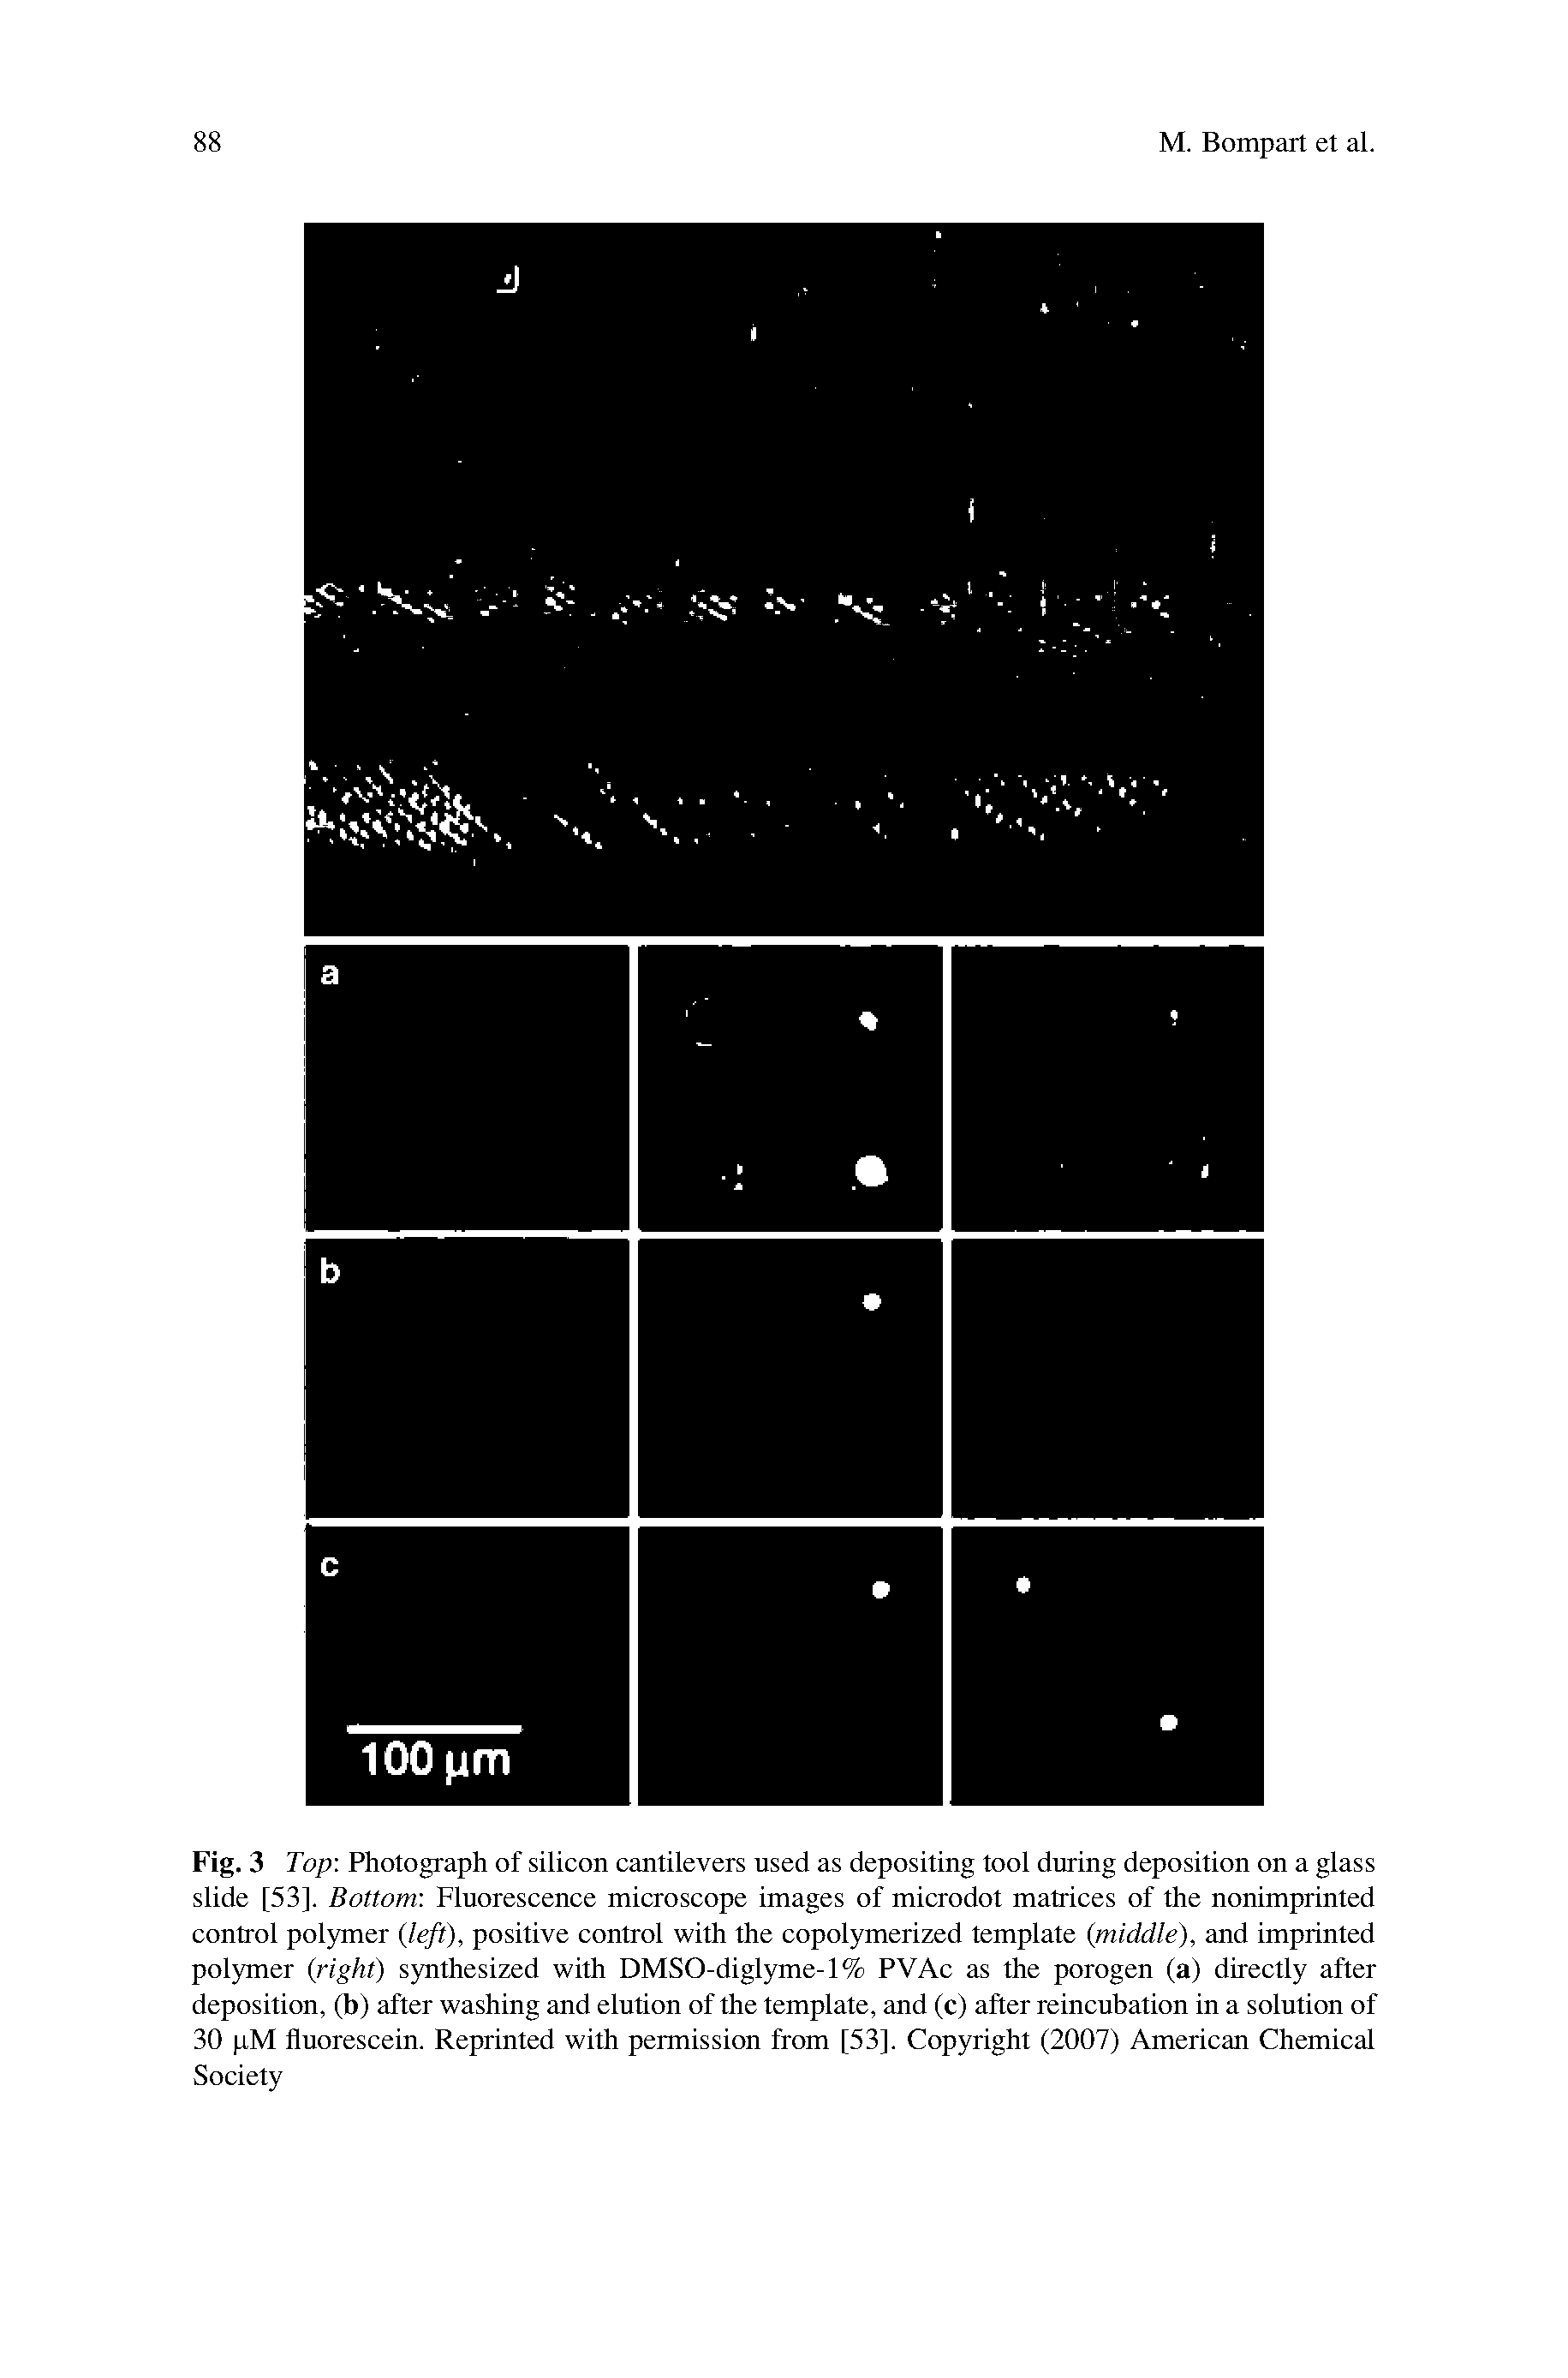 Fig. 3 Top Photograph of silicon cantilevers used as depositing tool during deposition on a glass slide [53], Bottom Fluorescence microscope images of microdot matrices of the nonimprinted control polymer (left), positive control with the copolymerized template (middle), and imprinted polymer (right) synthesized with DMSO-diglyme-1% PVAc as the porogen (a) directly after deposition, (b) after washing and elution of the template, and (c) after reincubation in a solution of 30 pM fluorescein. Reprinted with permission from [53], Copyright (2007) American Chemical Society...